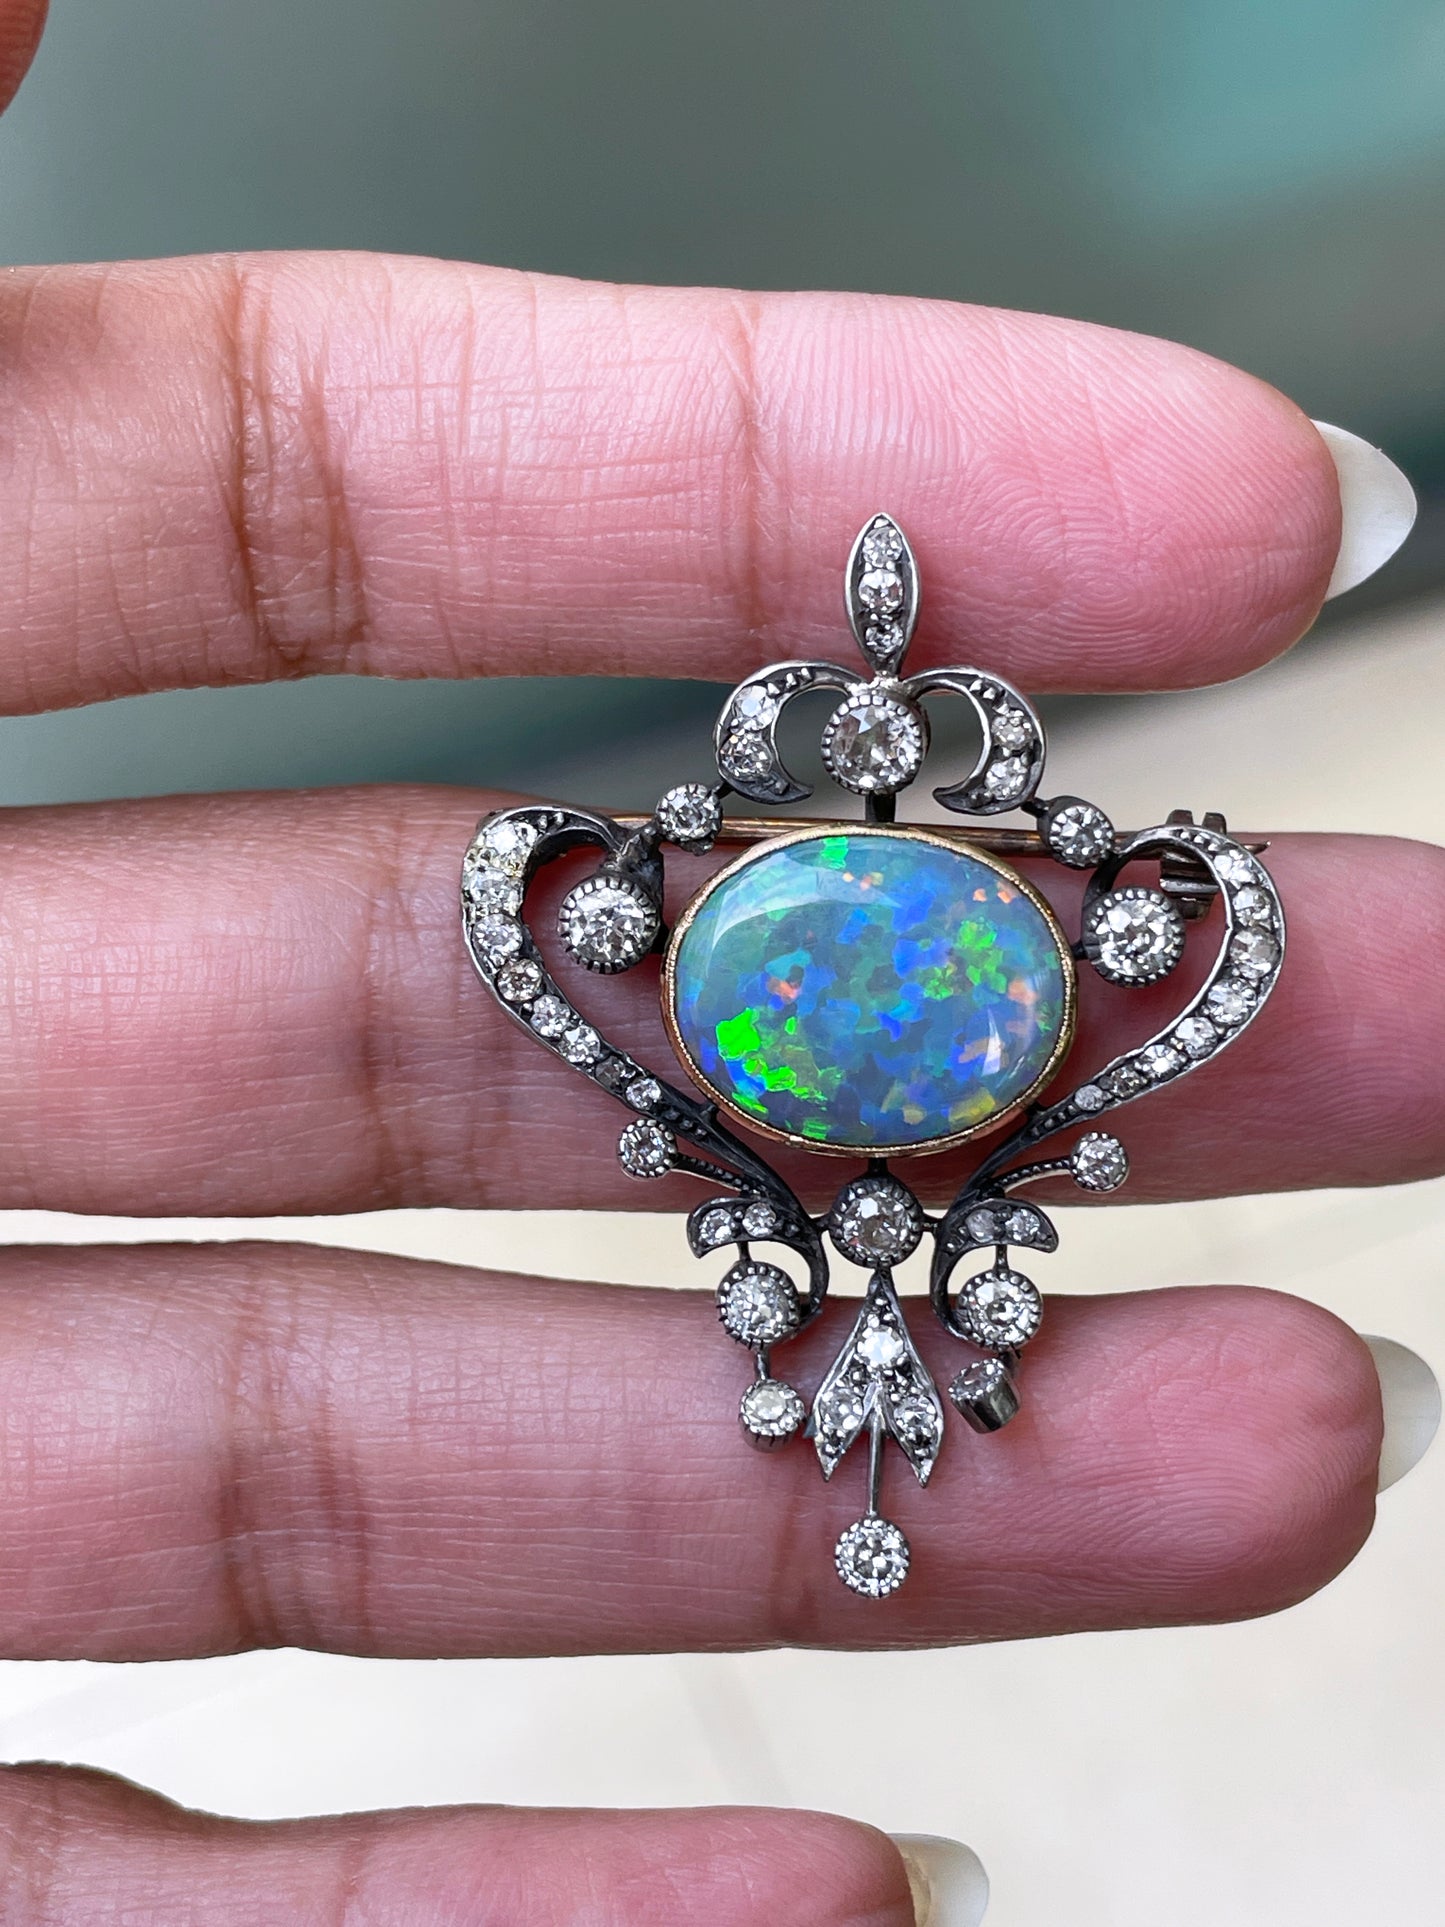 Antique Black Opal and Old Mine Cut Diamond Silver on Gold Brooch, circa 1880